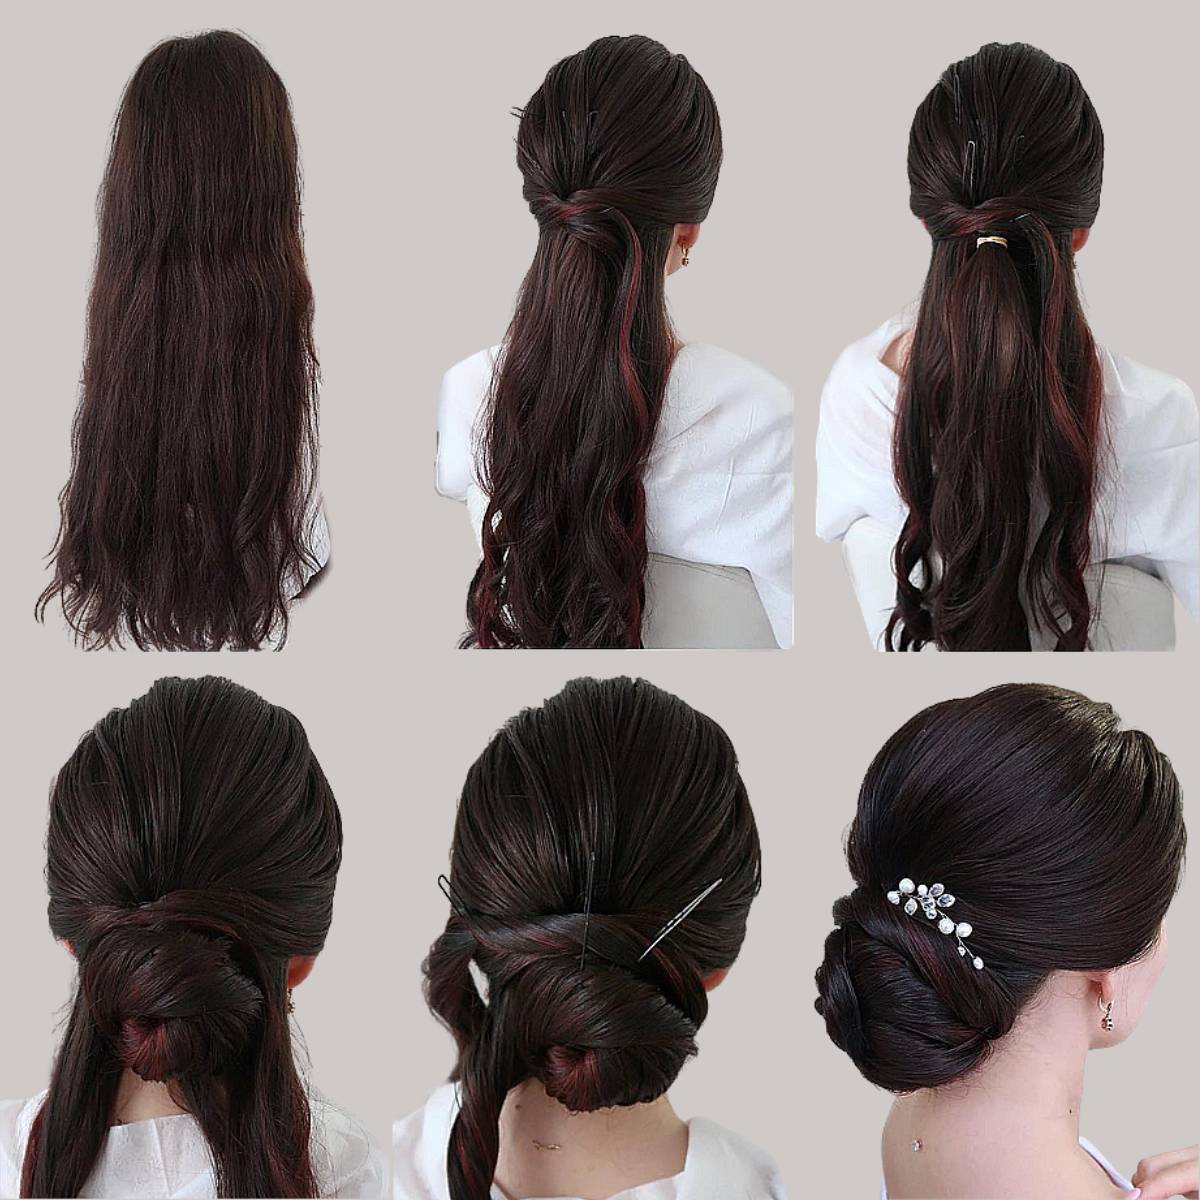 Discover 148+ gel hairstyles for long hair best